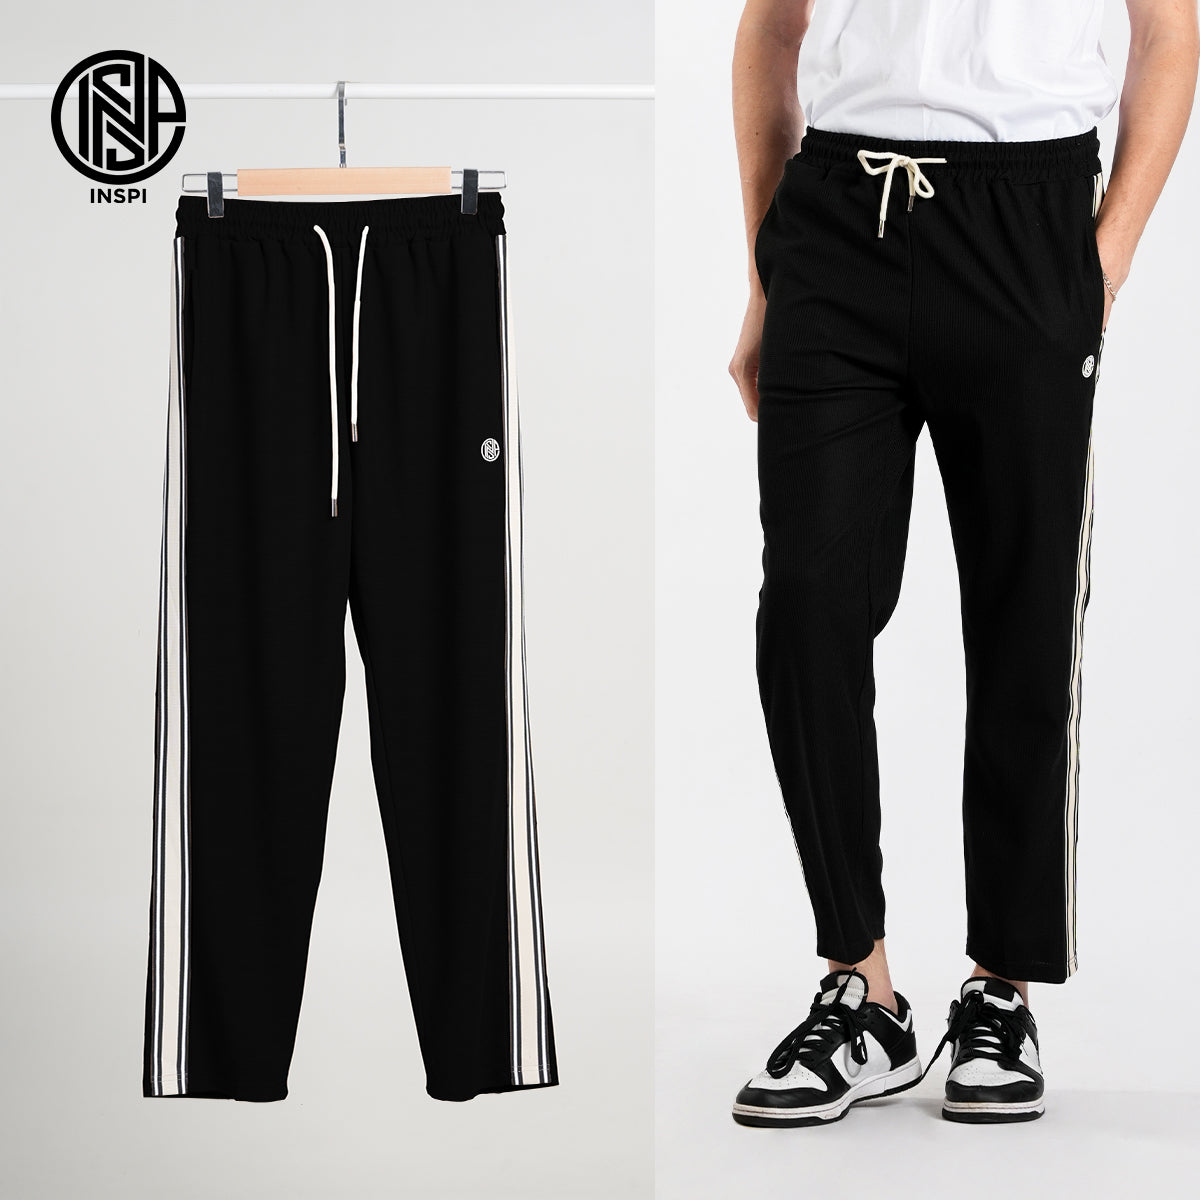 INSPI Waffle Pants with Drawstring and Pockets for Men and Women.